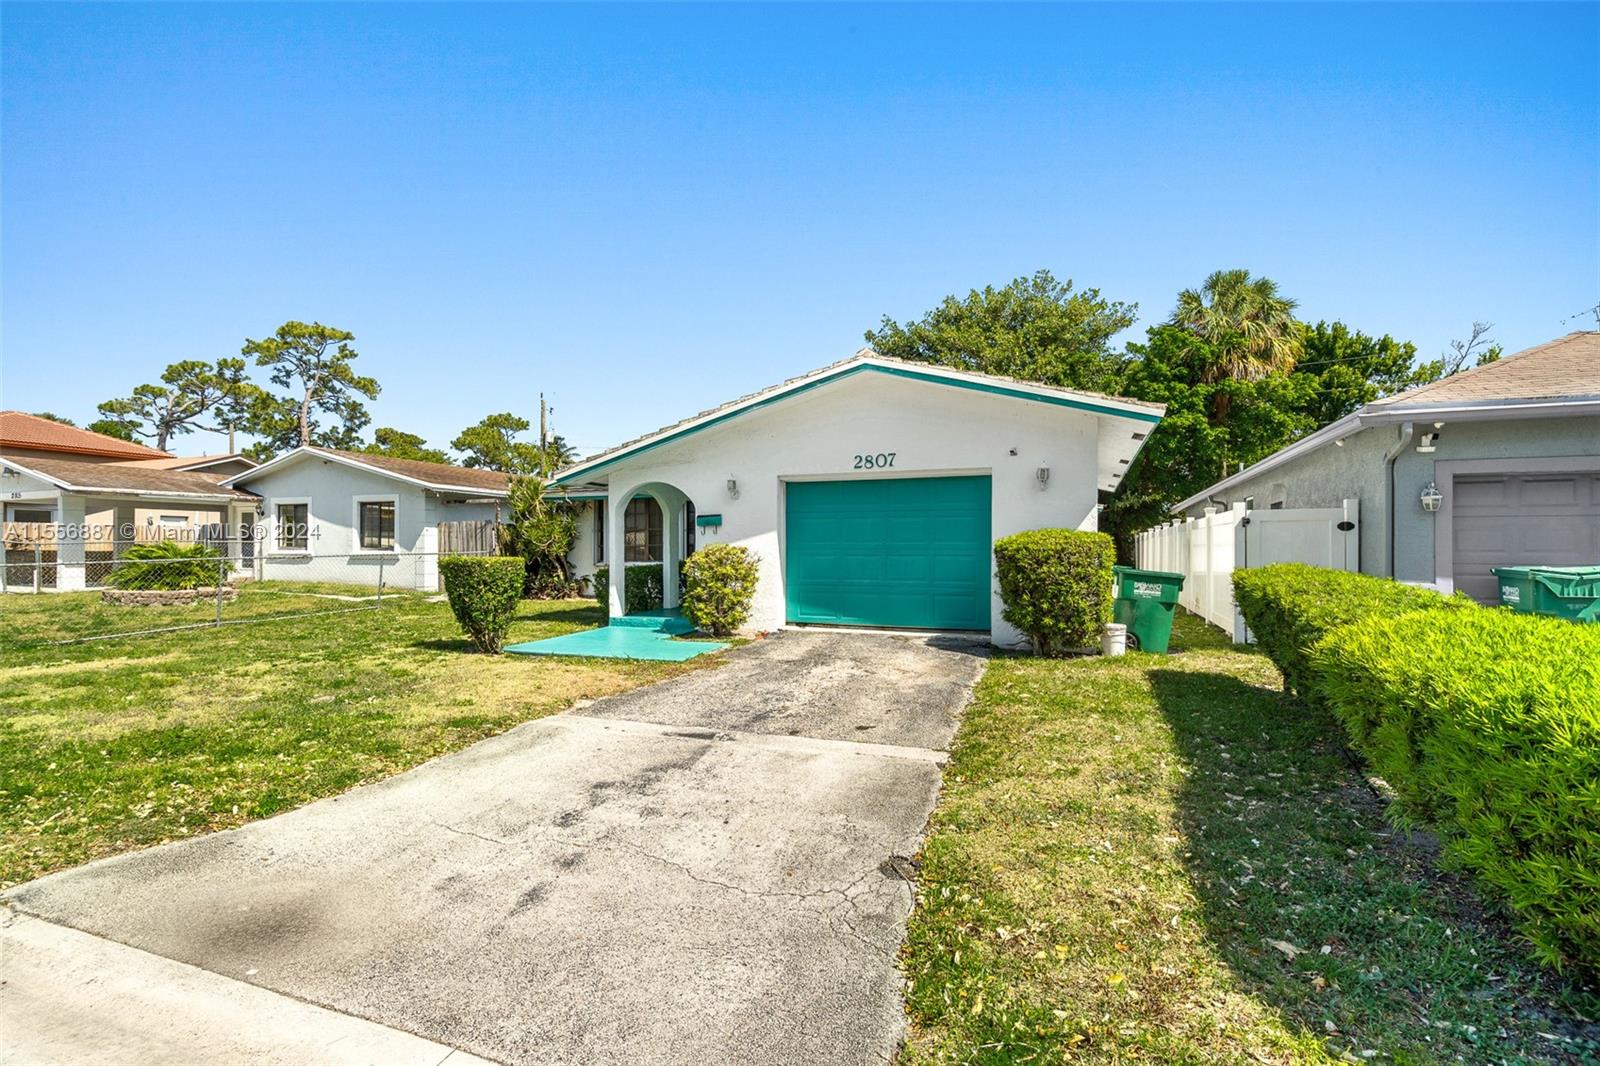 2807 Nw 9th St St, Fort Lauderdale, Broward County, Florida - 3 Bedrooms  
2 Bathrooms - 